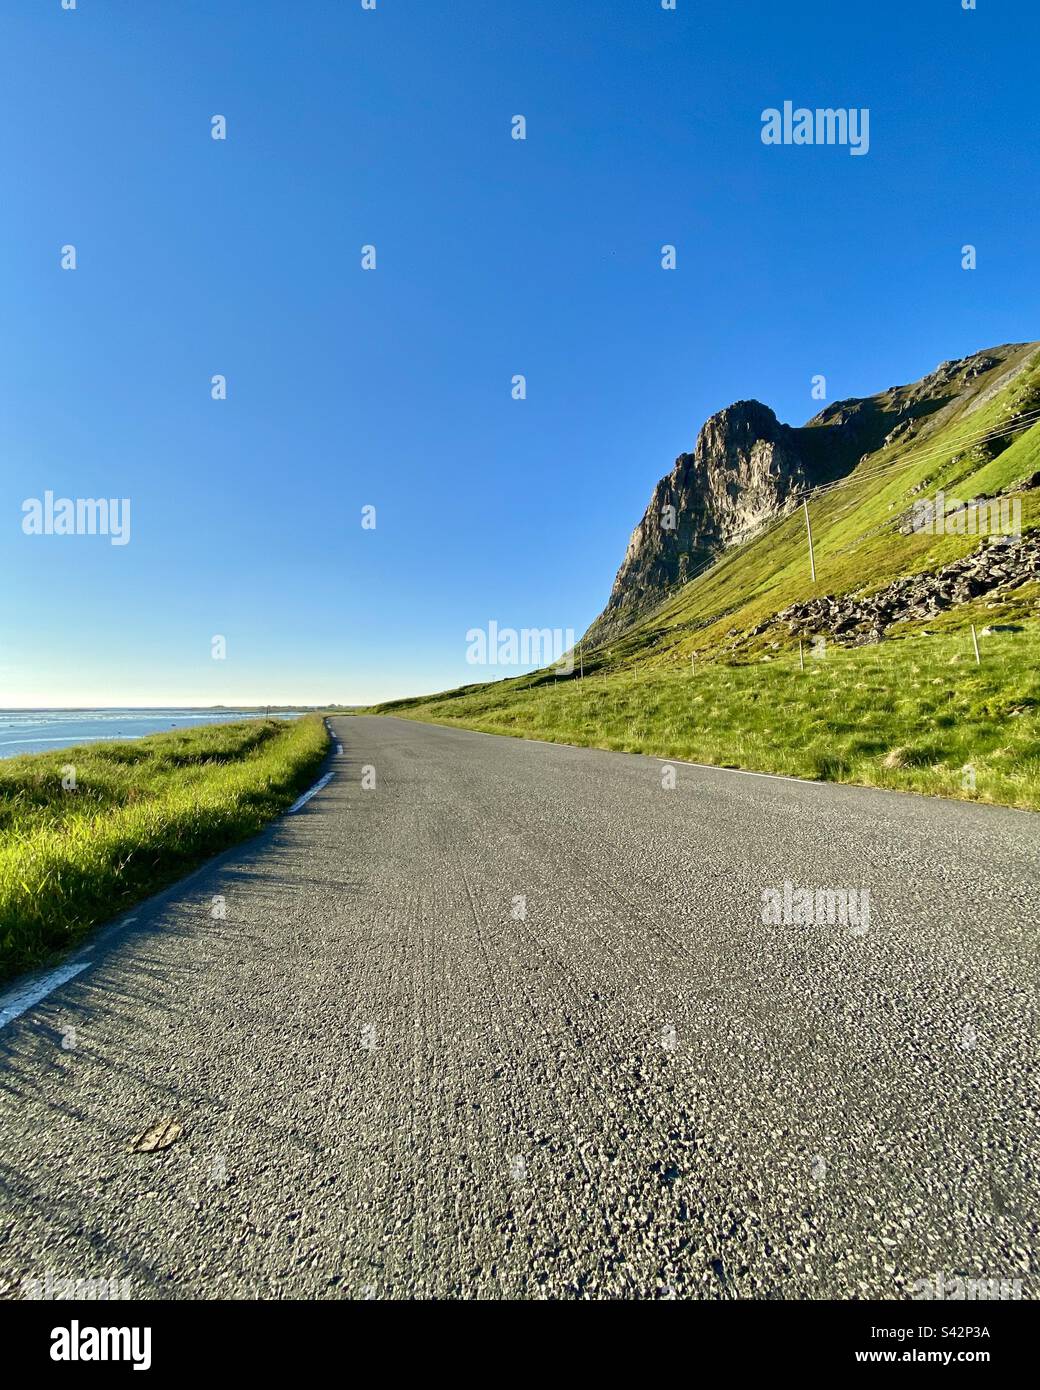 Asphalt road by the sea on a sunny late summer evening in Lofoten islands, Norway. Stock Photo